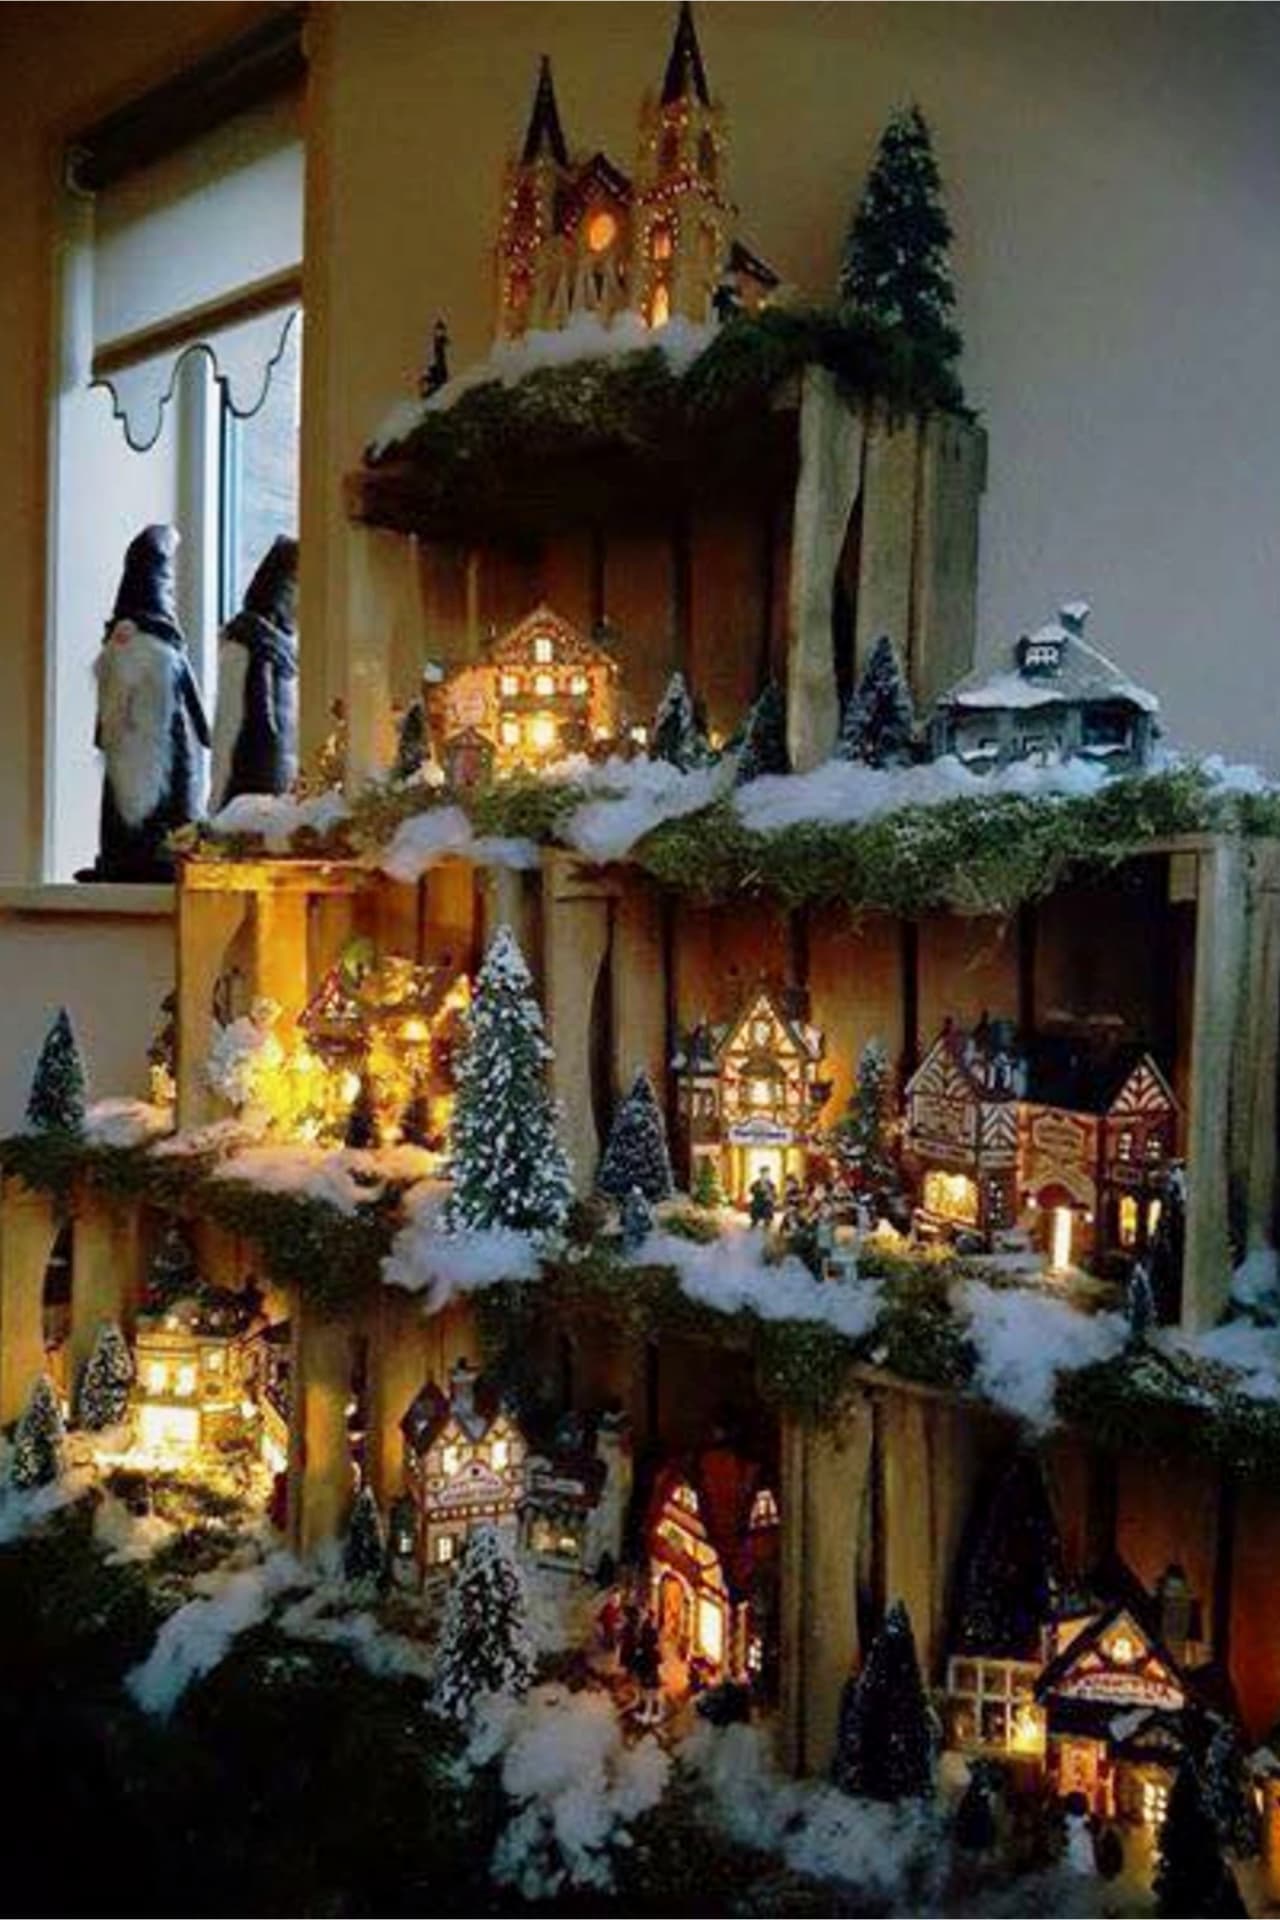 DIY Christmas Decorating Ideas - Christmas Village set up ideas - use wooden crates to display your Christmas village decorations for easy Christmas decor on a budget